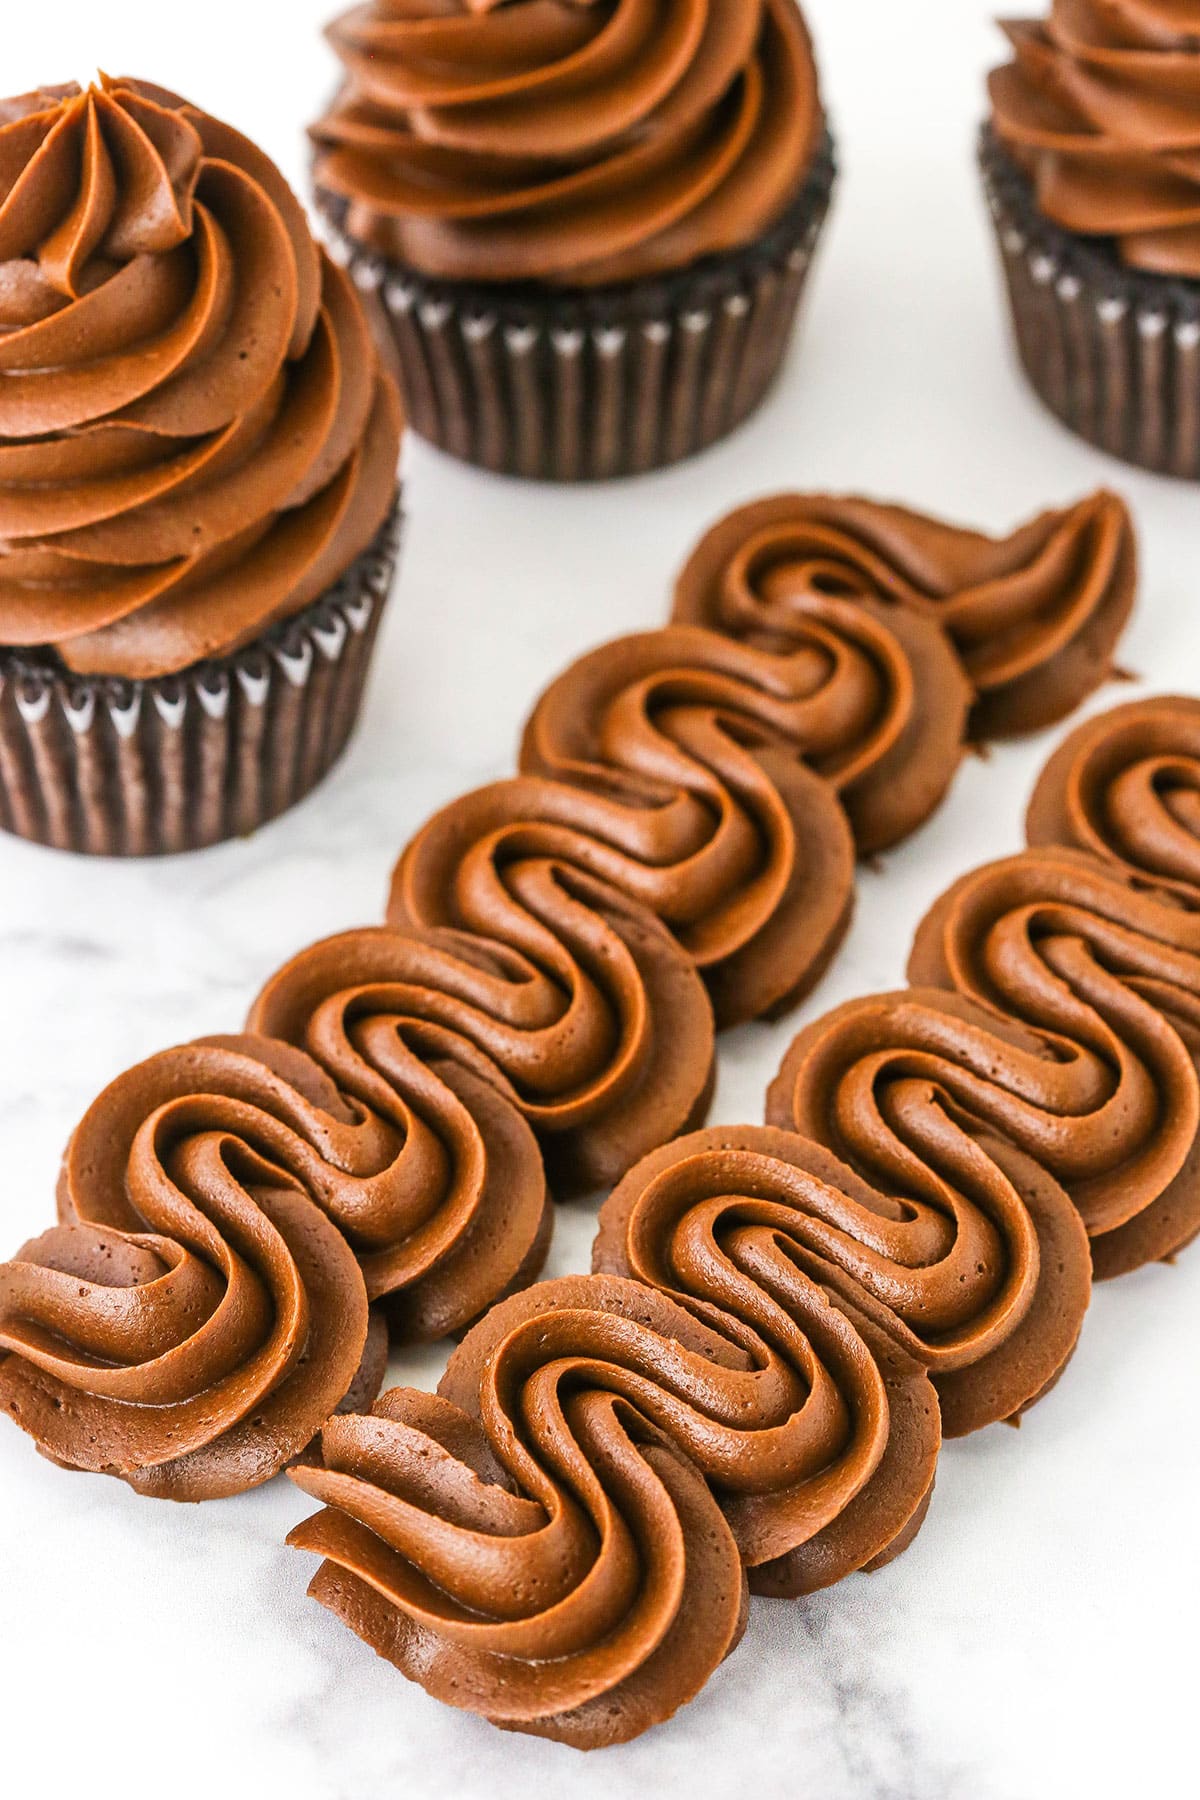 Two rows of Chocolate Buttercream Frosting piped onto a white marble table with three chocolate cupcakes topped with Chocolate Buttercream Frosting in the background